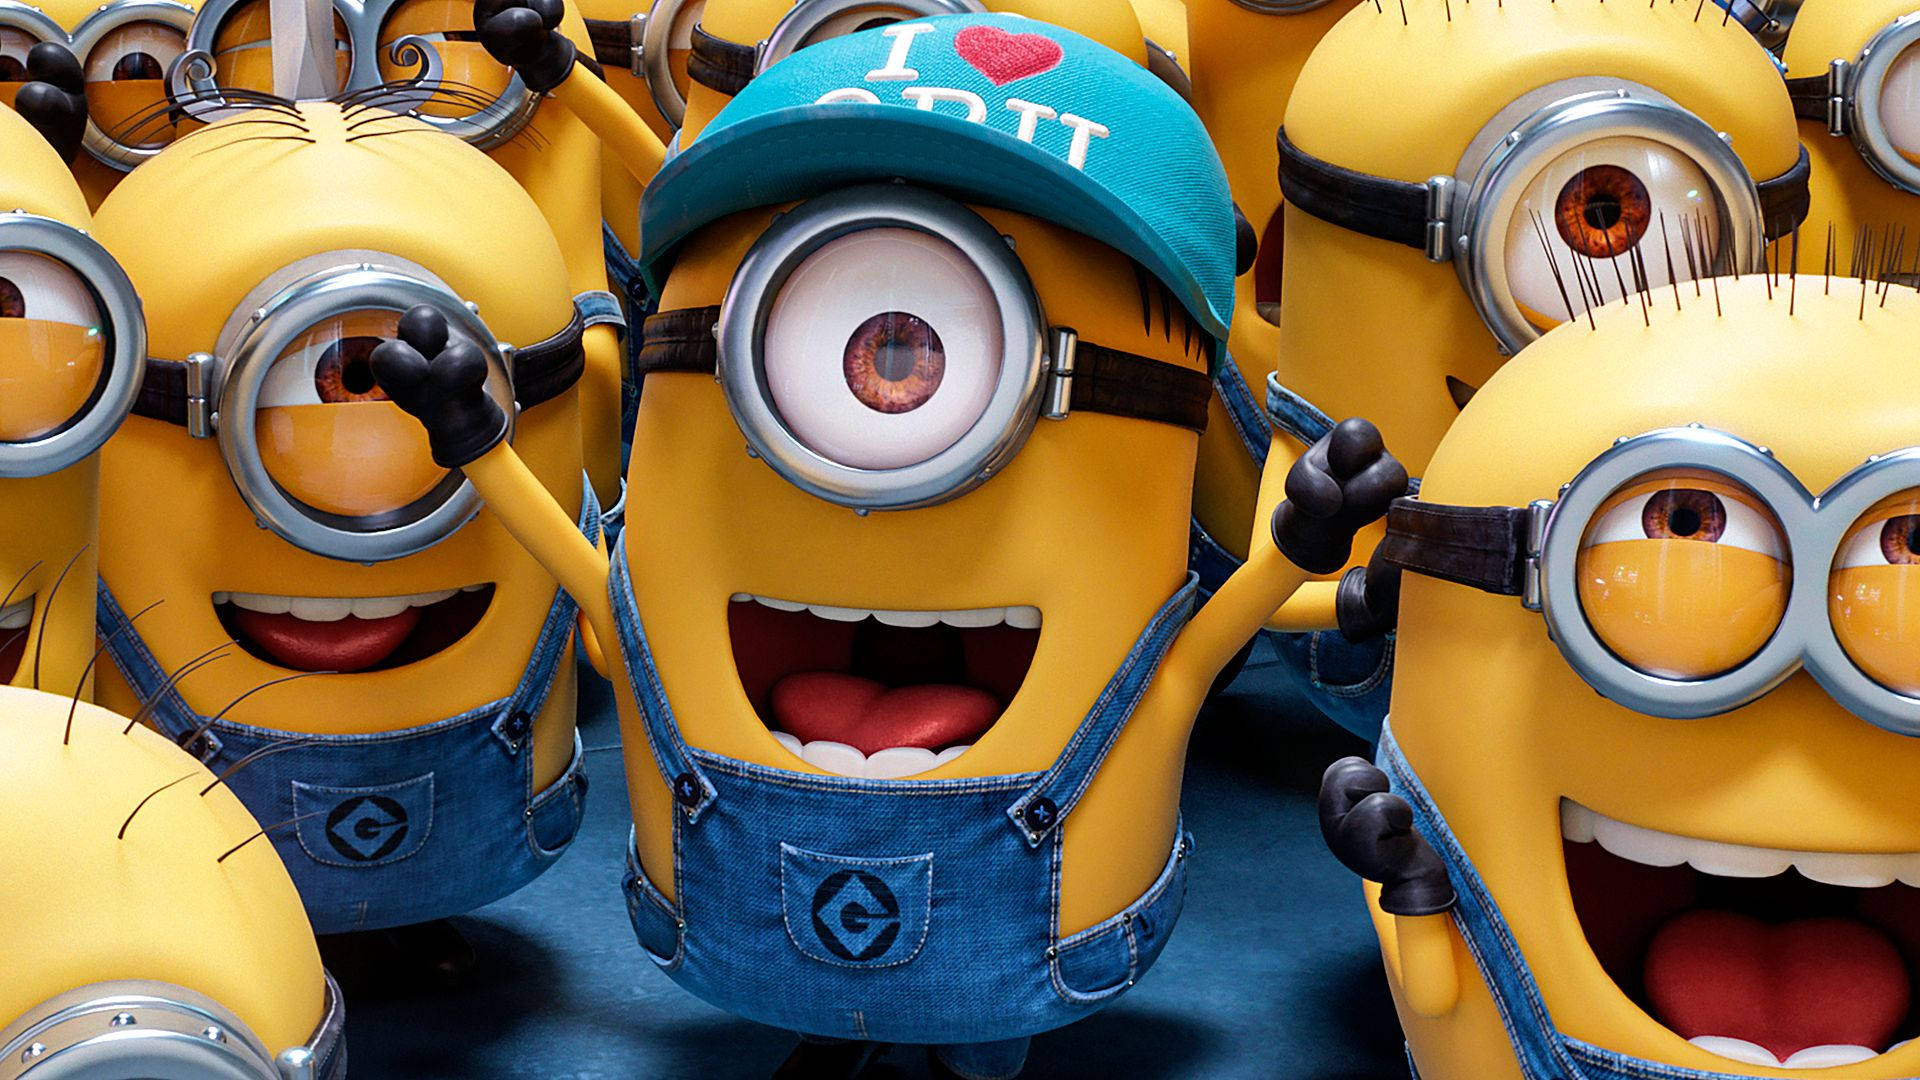 Despicable Me 3 Minions Smiling Widely Picture